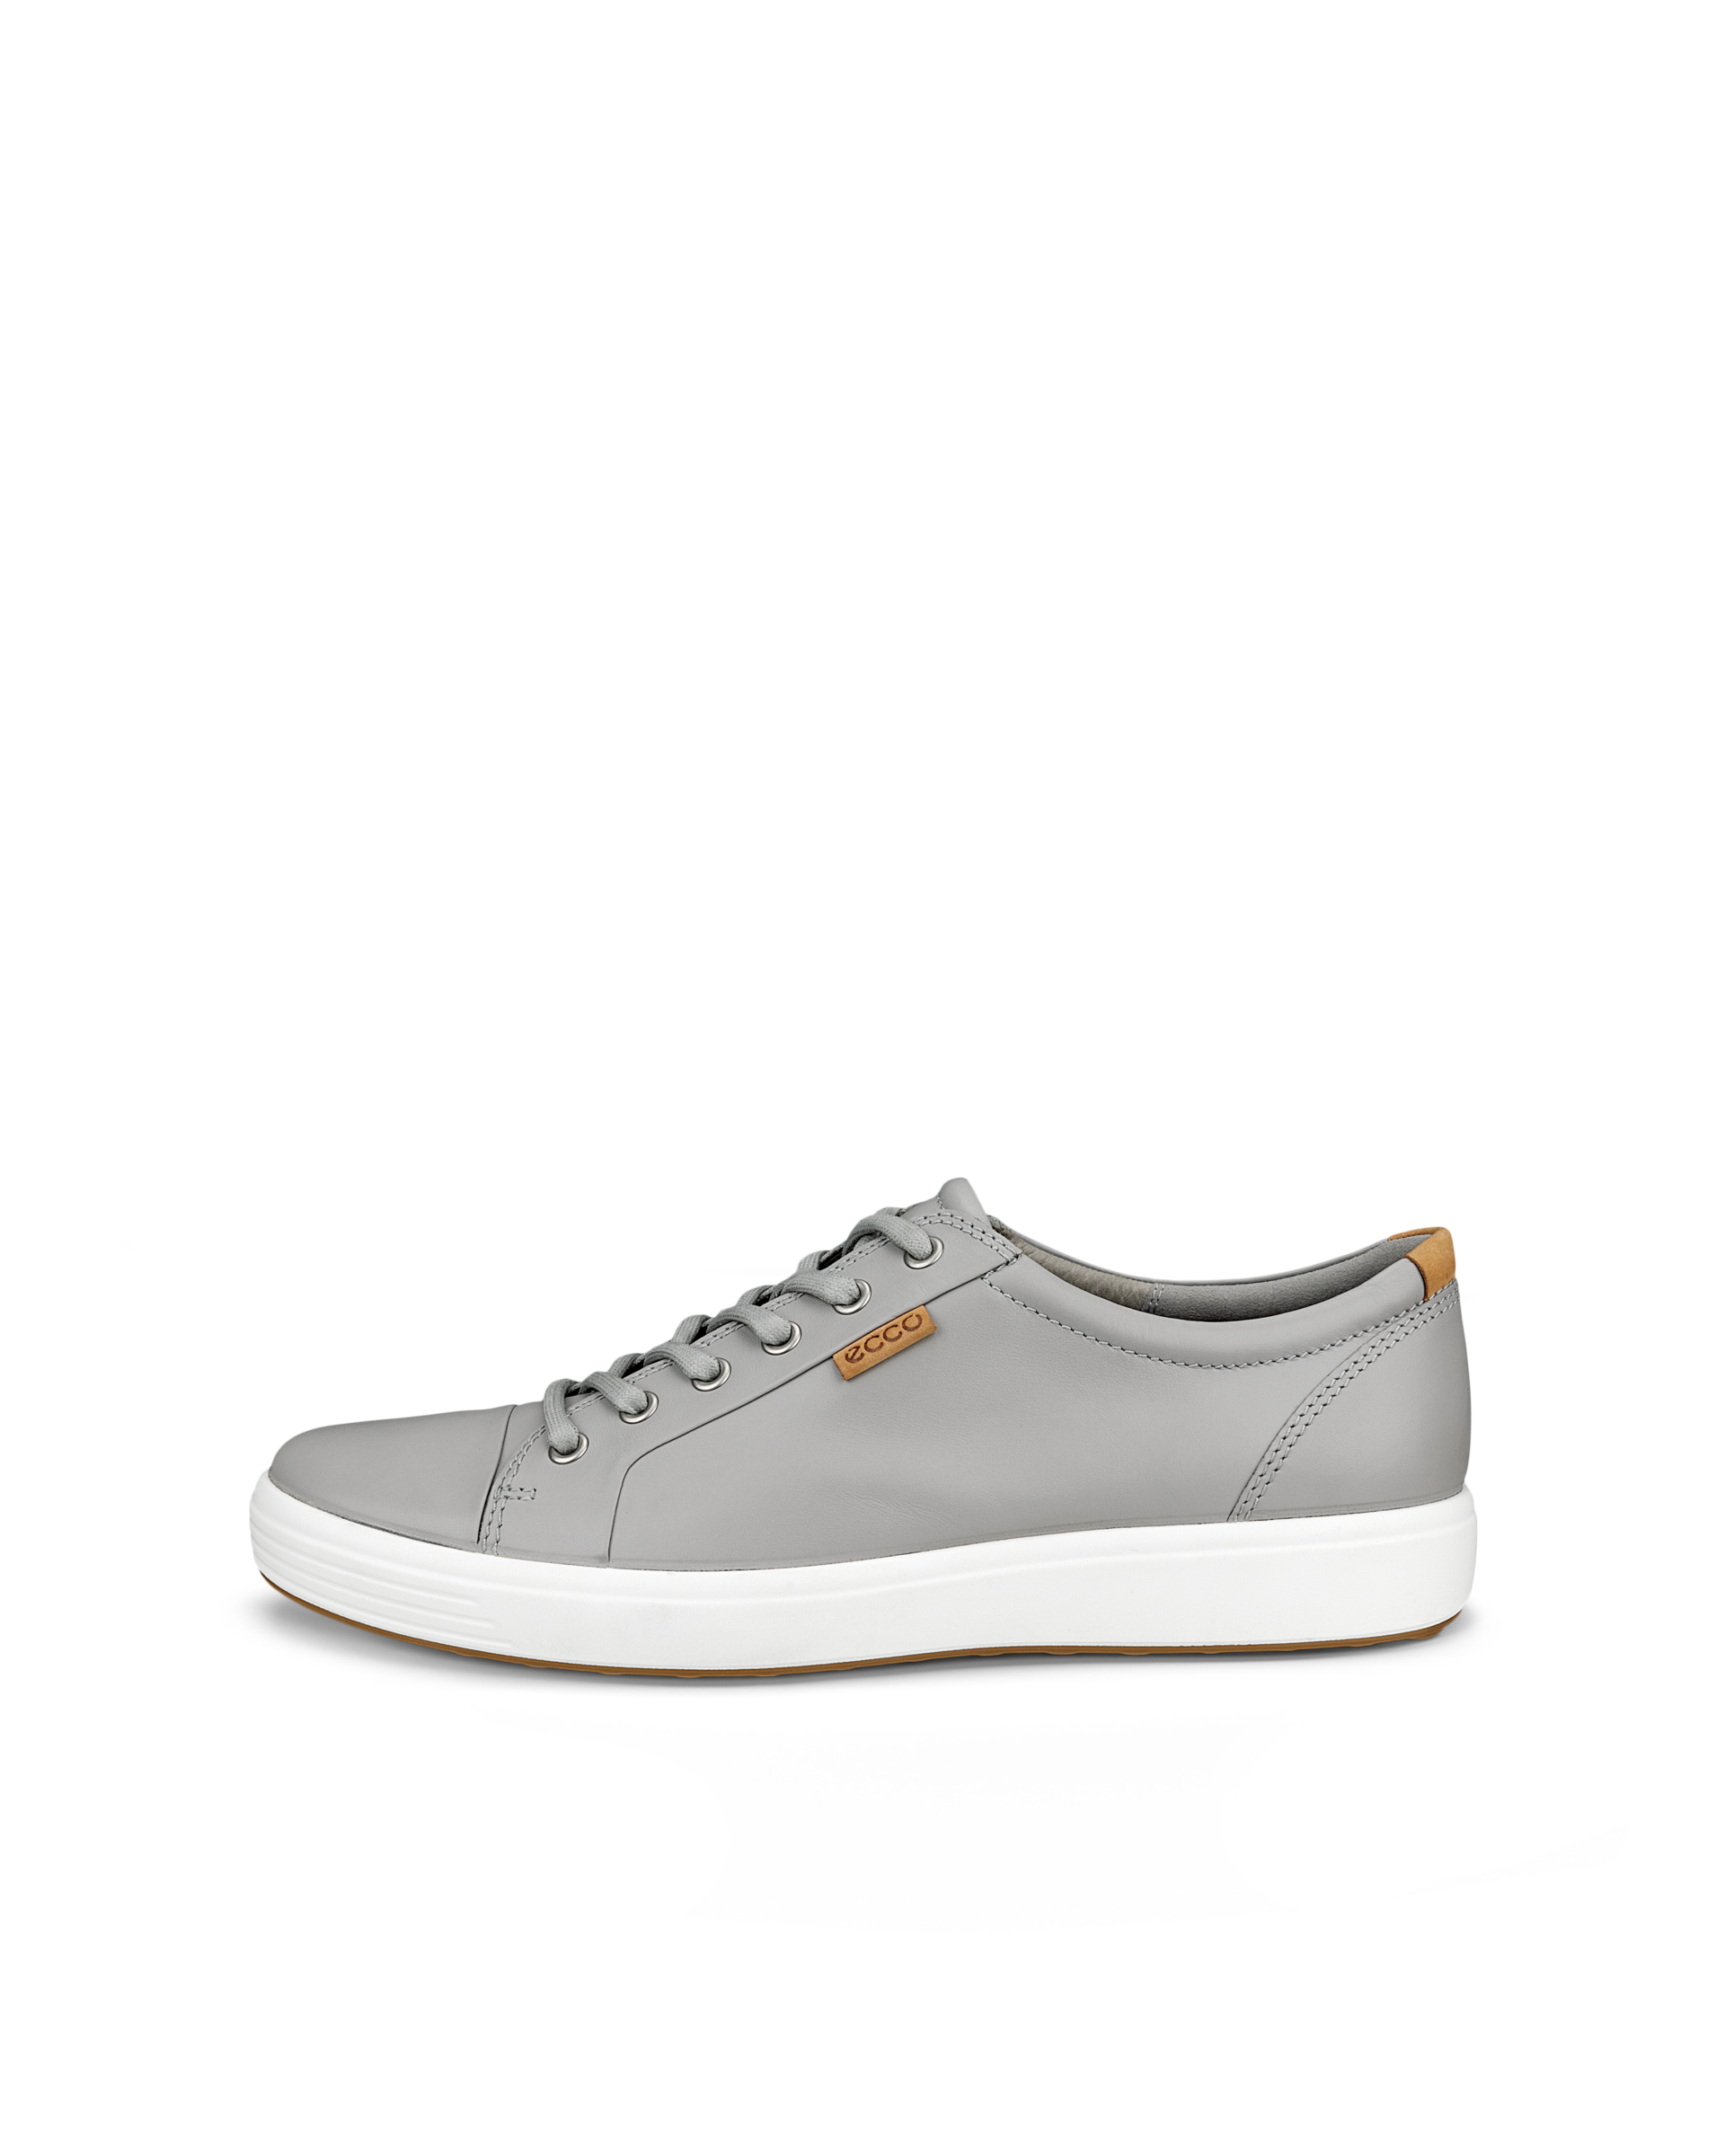 FEETHITWomens Classic Walking Sneaker All White – FEETHIT Running Shoes  Online Store